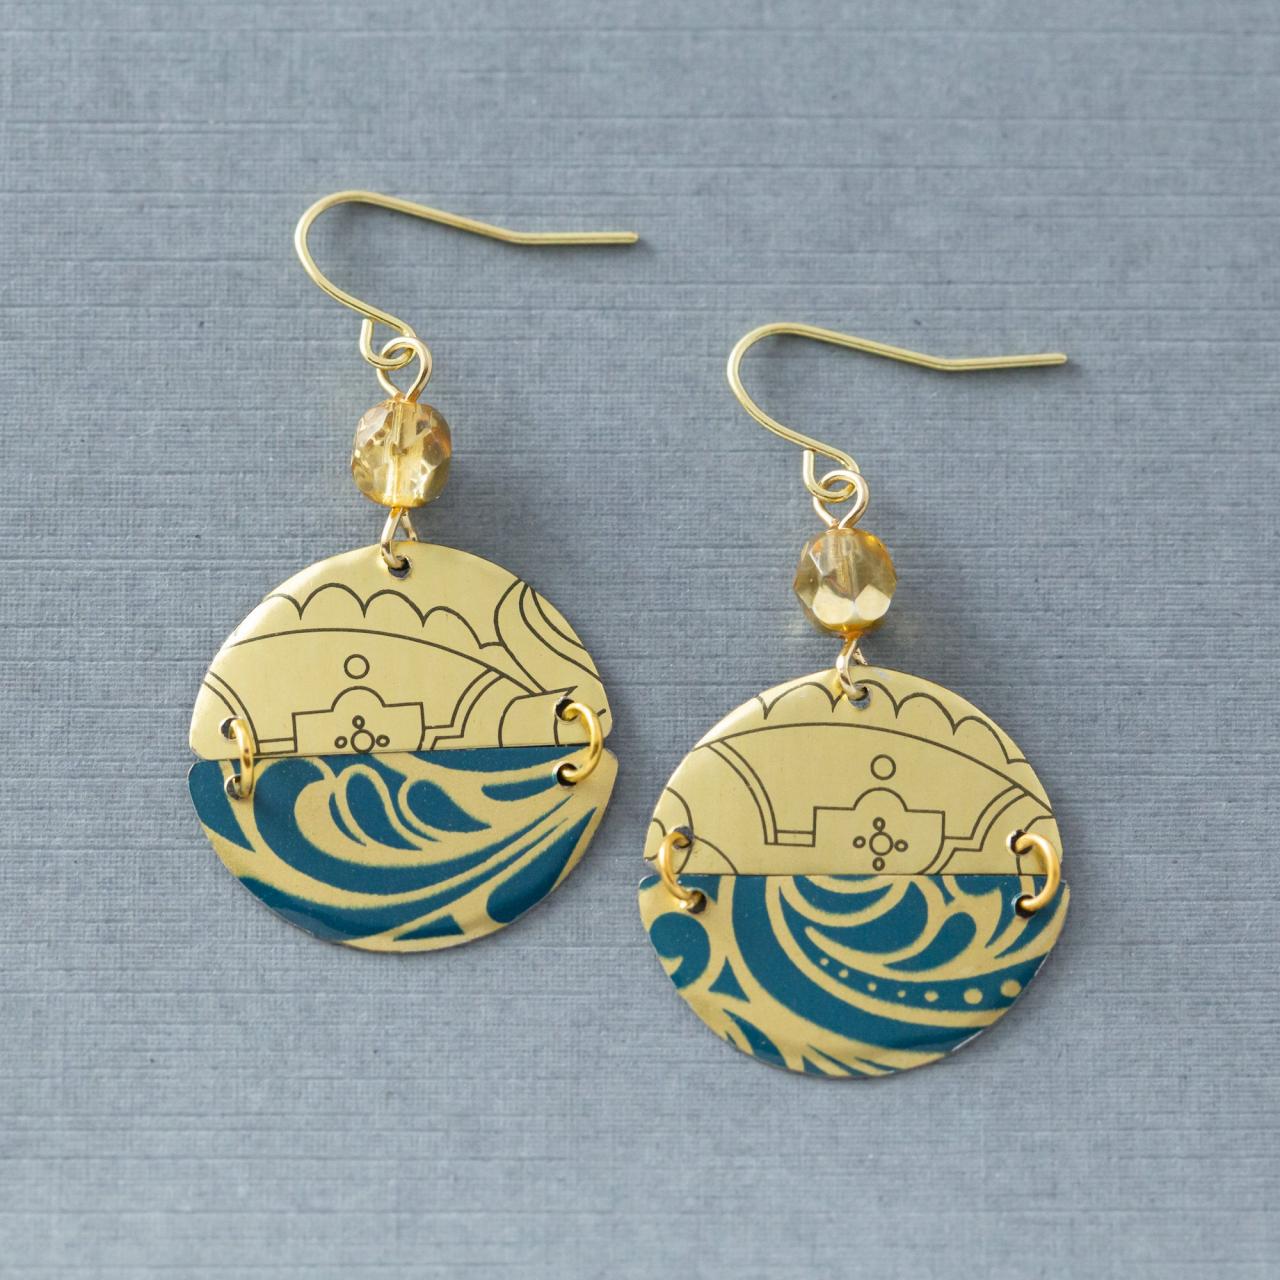 Mismatched Boho Half Circle Earrings, Mixed Metal Earrings, Semicircle Earrings, Tin Earrings, Gold And Teal Blue Earrings, Unusual Jewelry